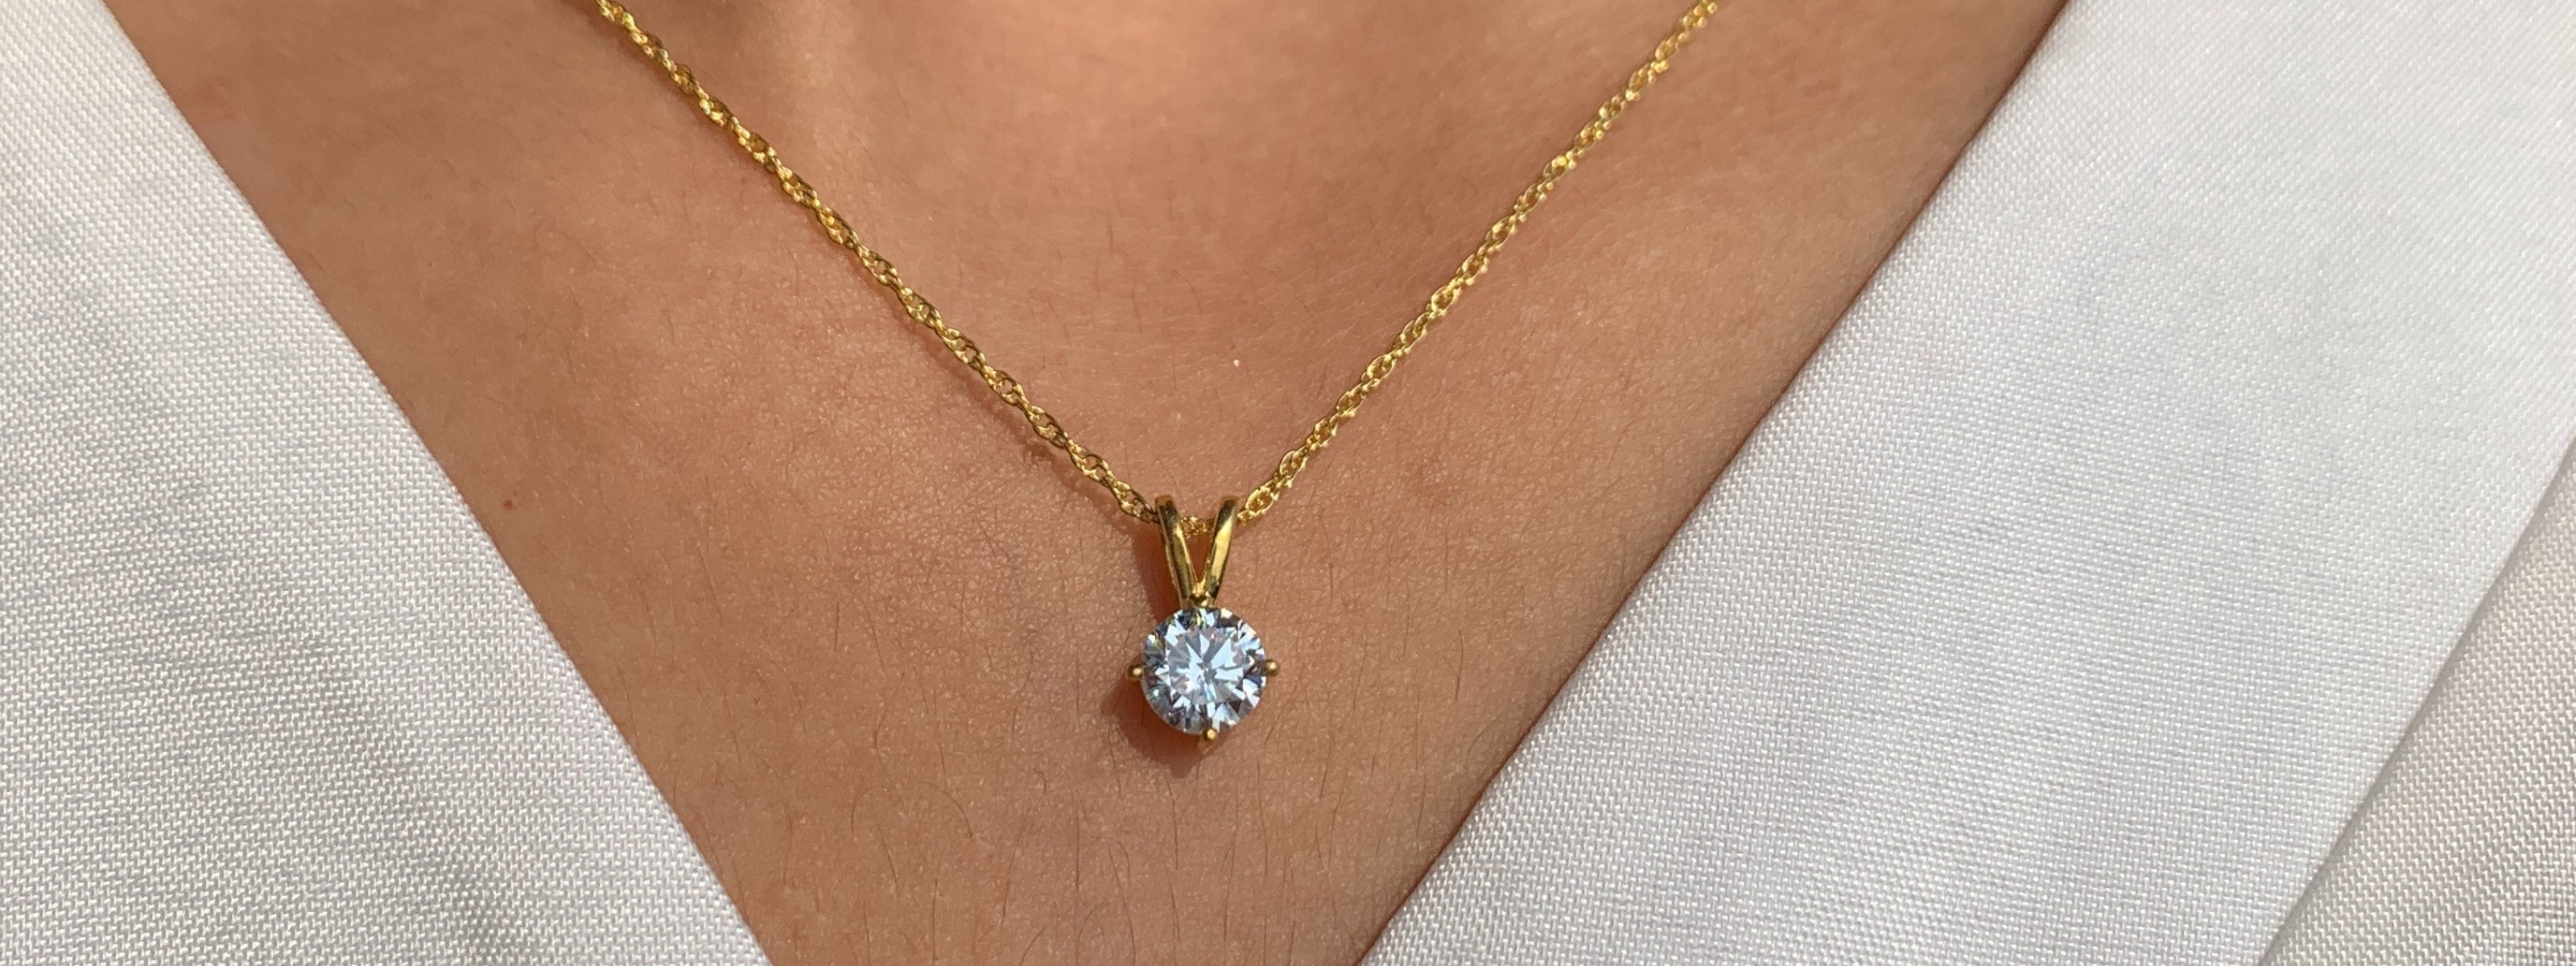 She is wearing round diamond solitaire necklace